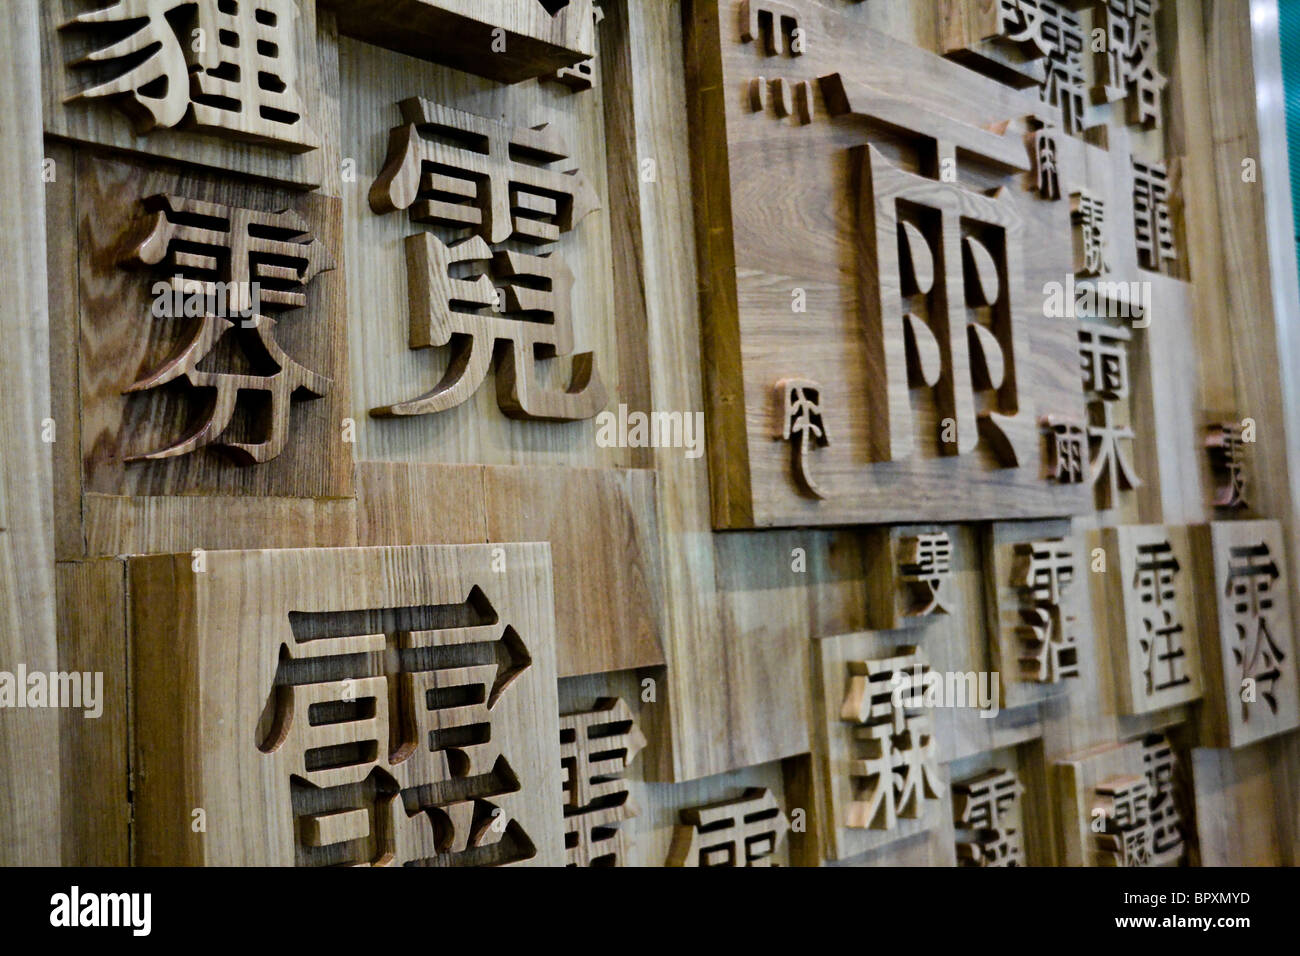 Chinese characters rains sign engraved on wood Stock Photo